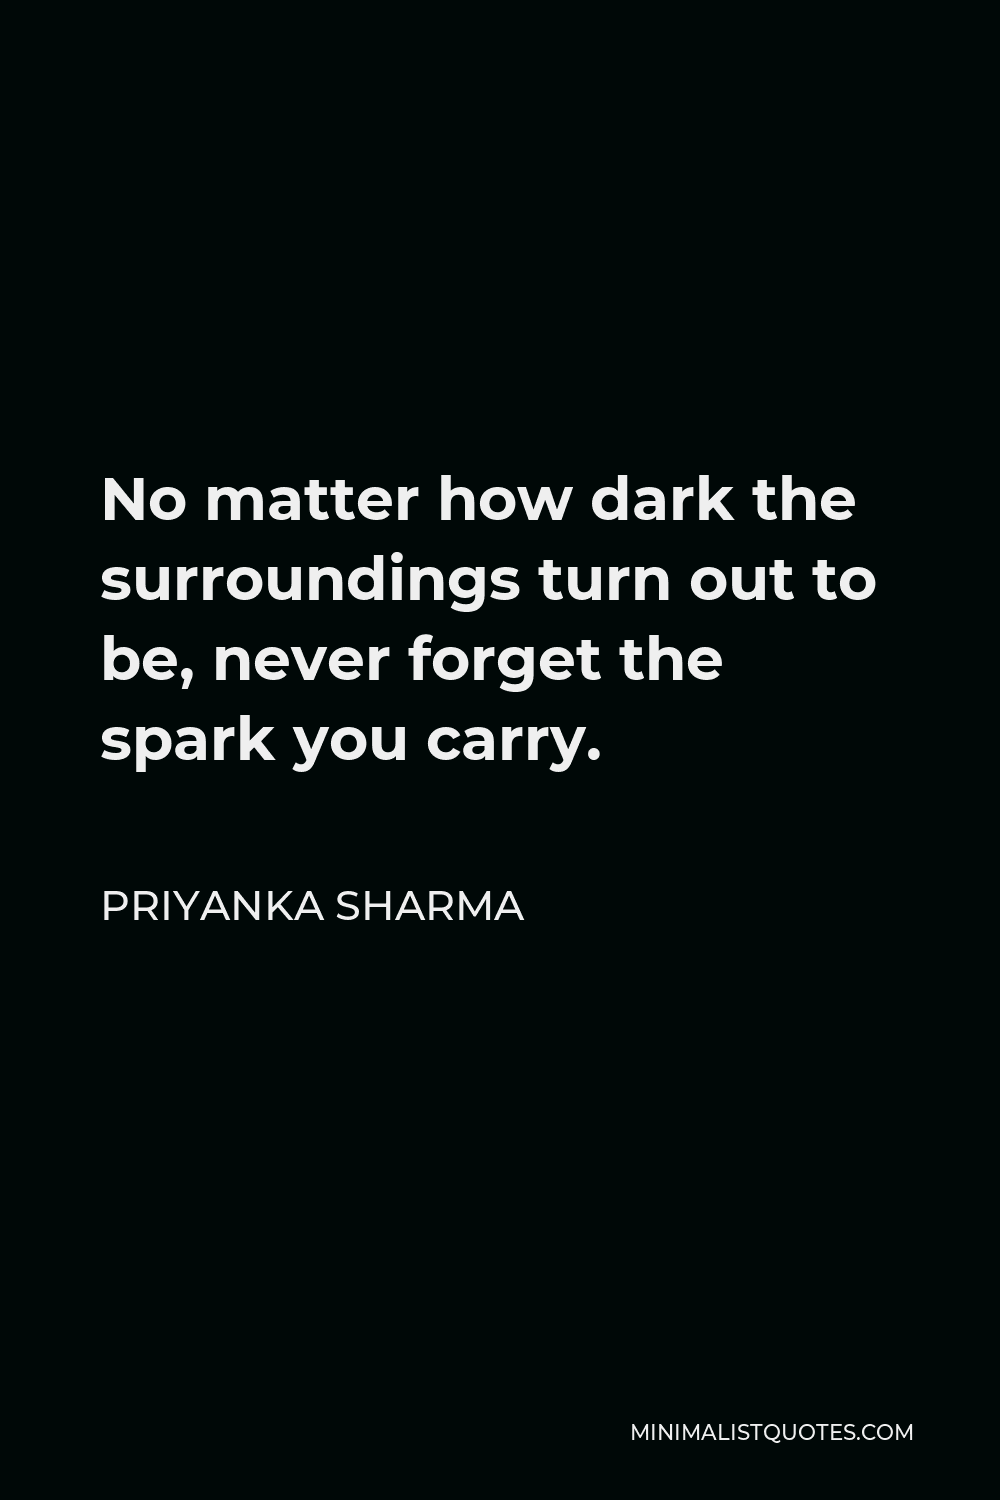 Priyanka Sharma Quote - No matter how dark the surroundings turn out to be, never forget the spark you carry.